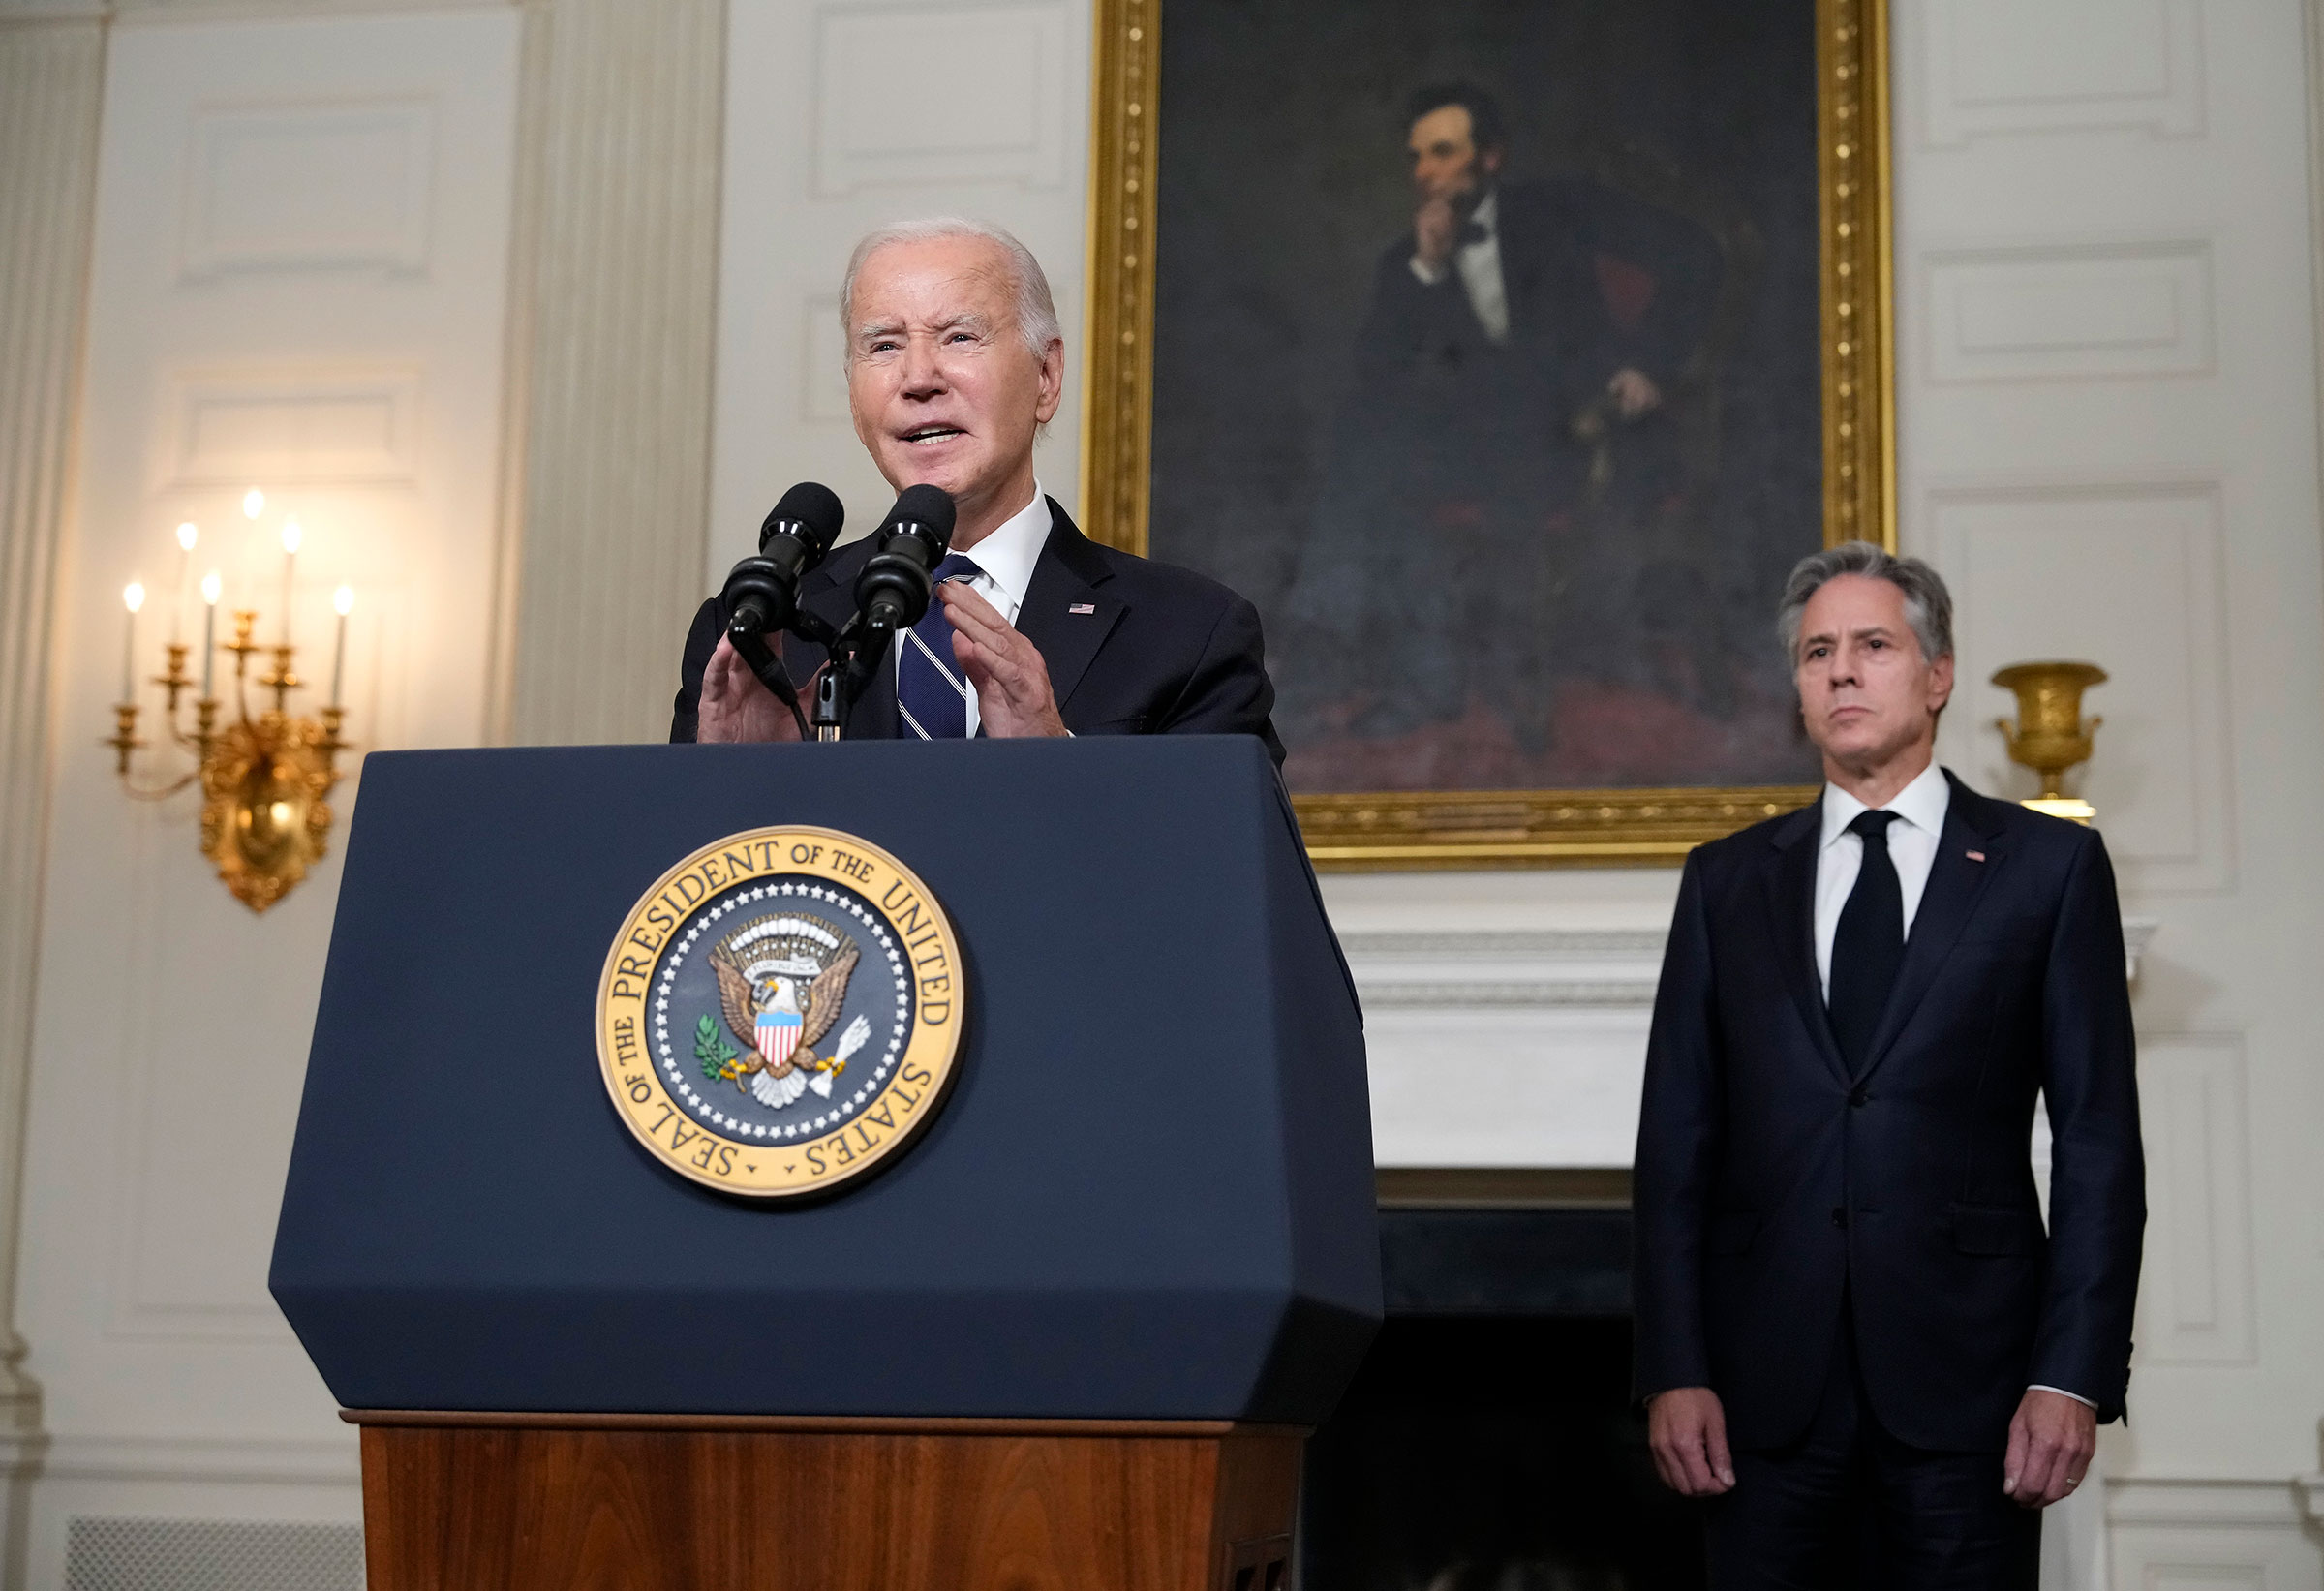 President Joe Biden, joined by Secretary of State Antony Blinken, delivers remarks on the Hamas terrorist attacks in Israel in the State Dining Room of the White House on Oct. 10. (Drew Angerer—Getty Images)